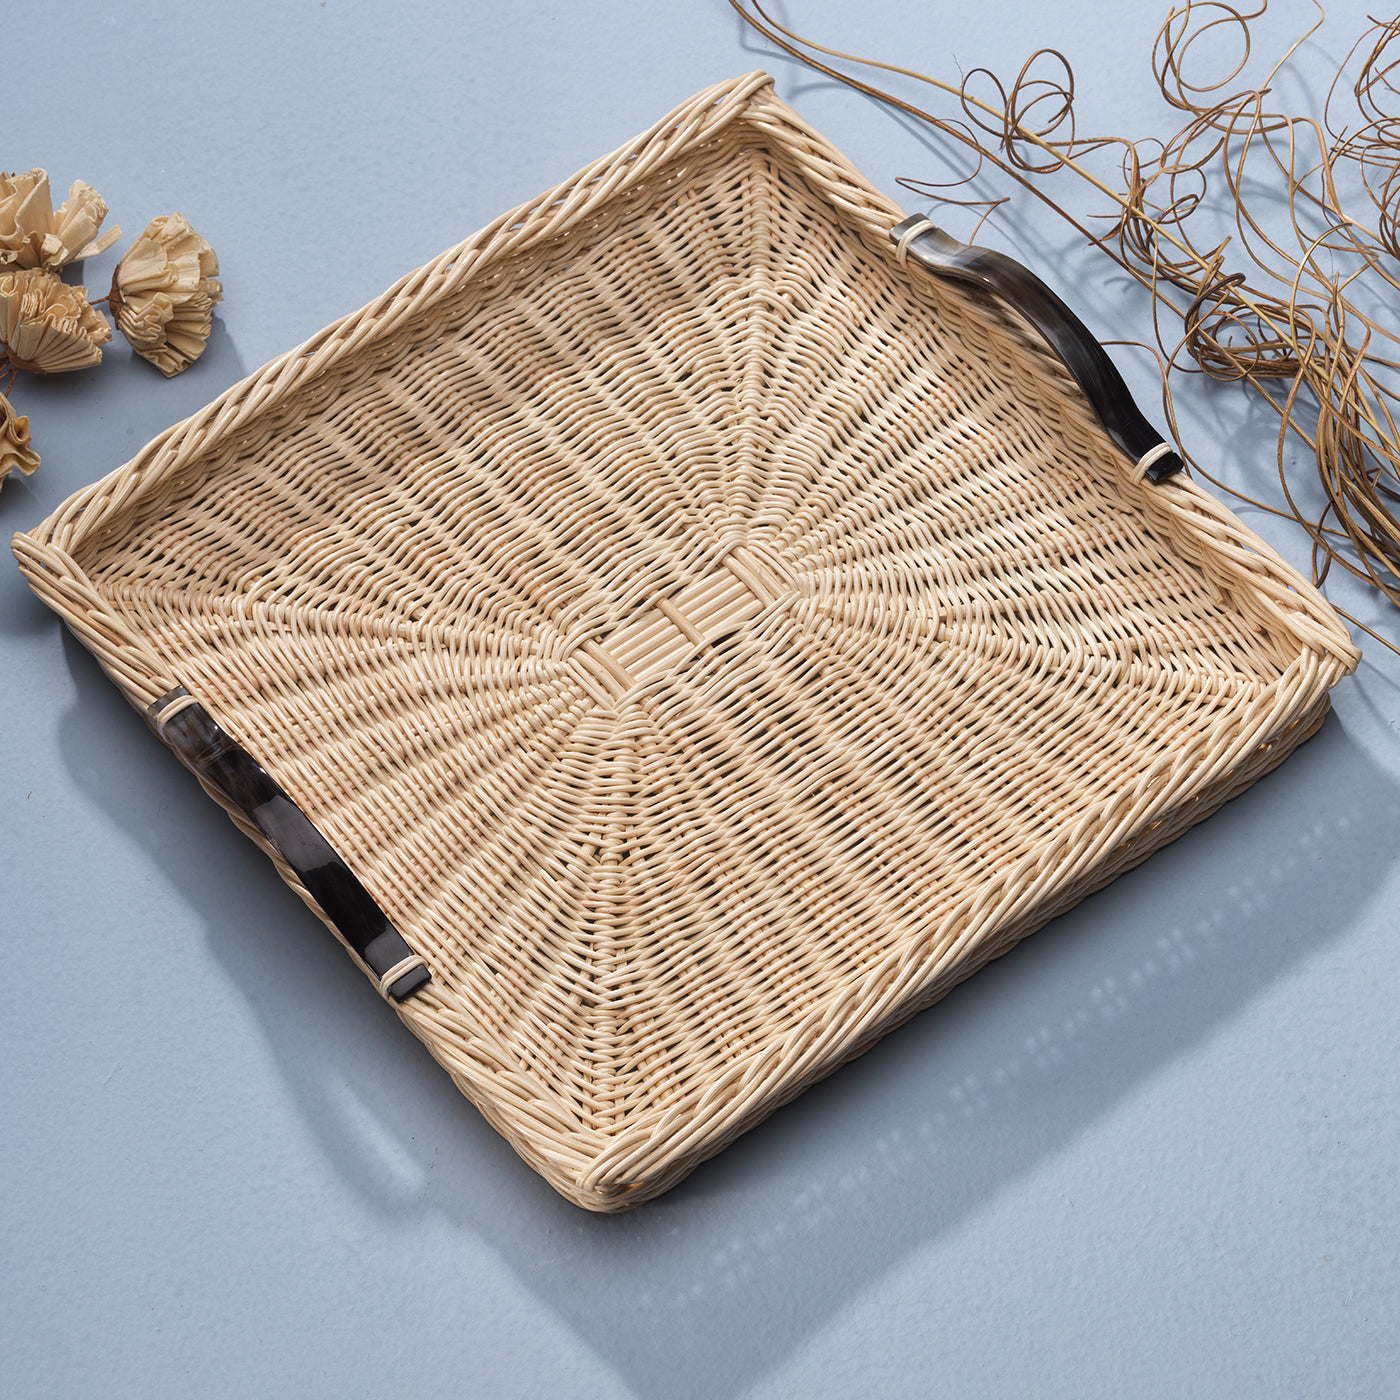 Papavero Square Wicker Tray with Horn Handles - Alternative view 1